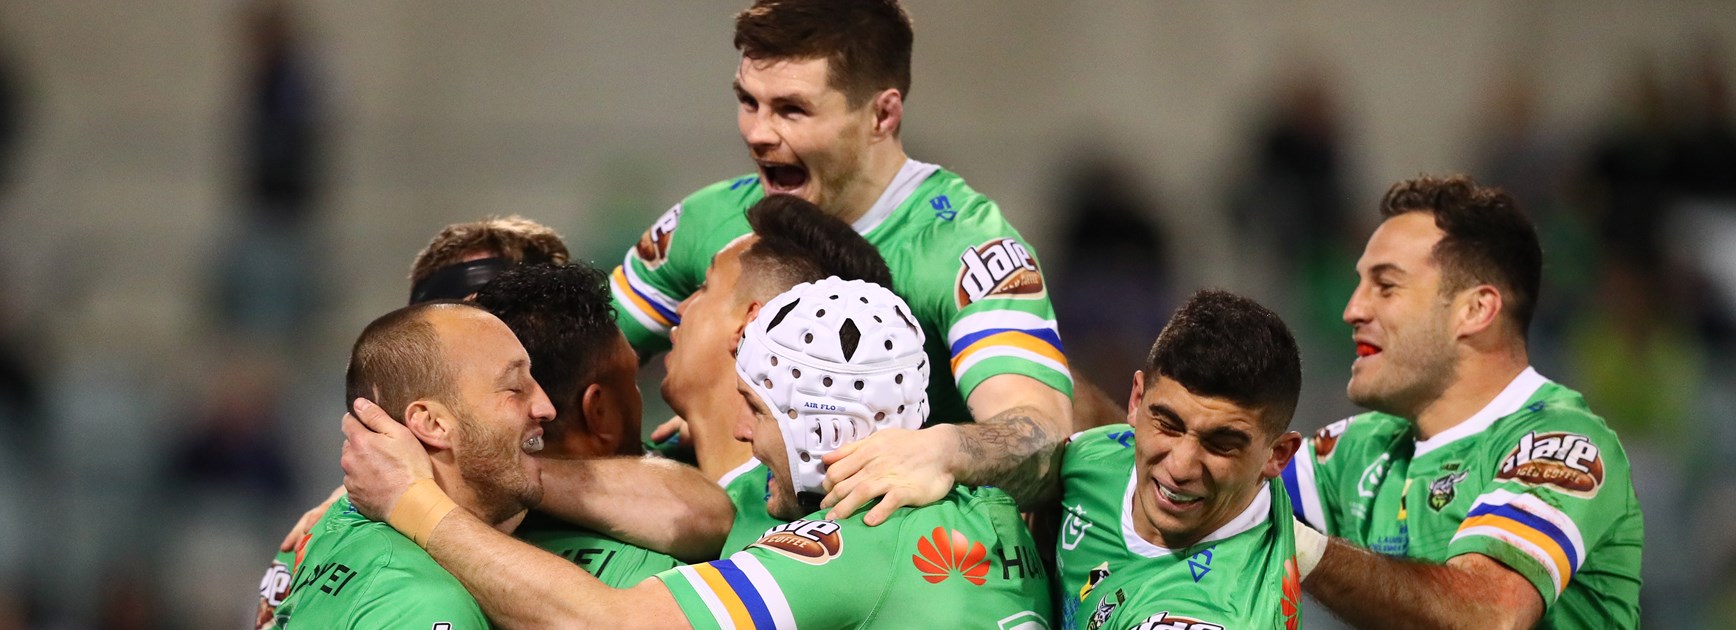 NRL Match Report: Raiders hold off Tigers